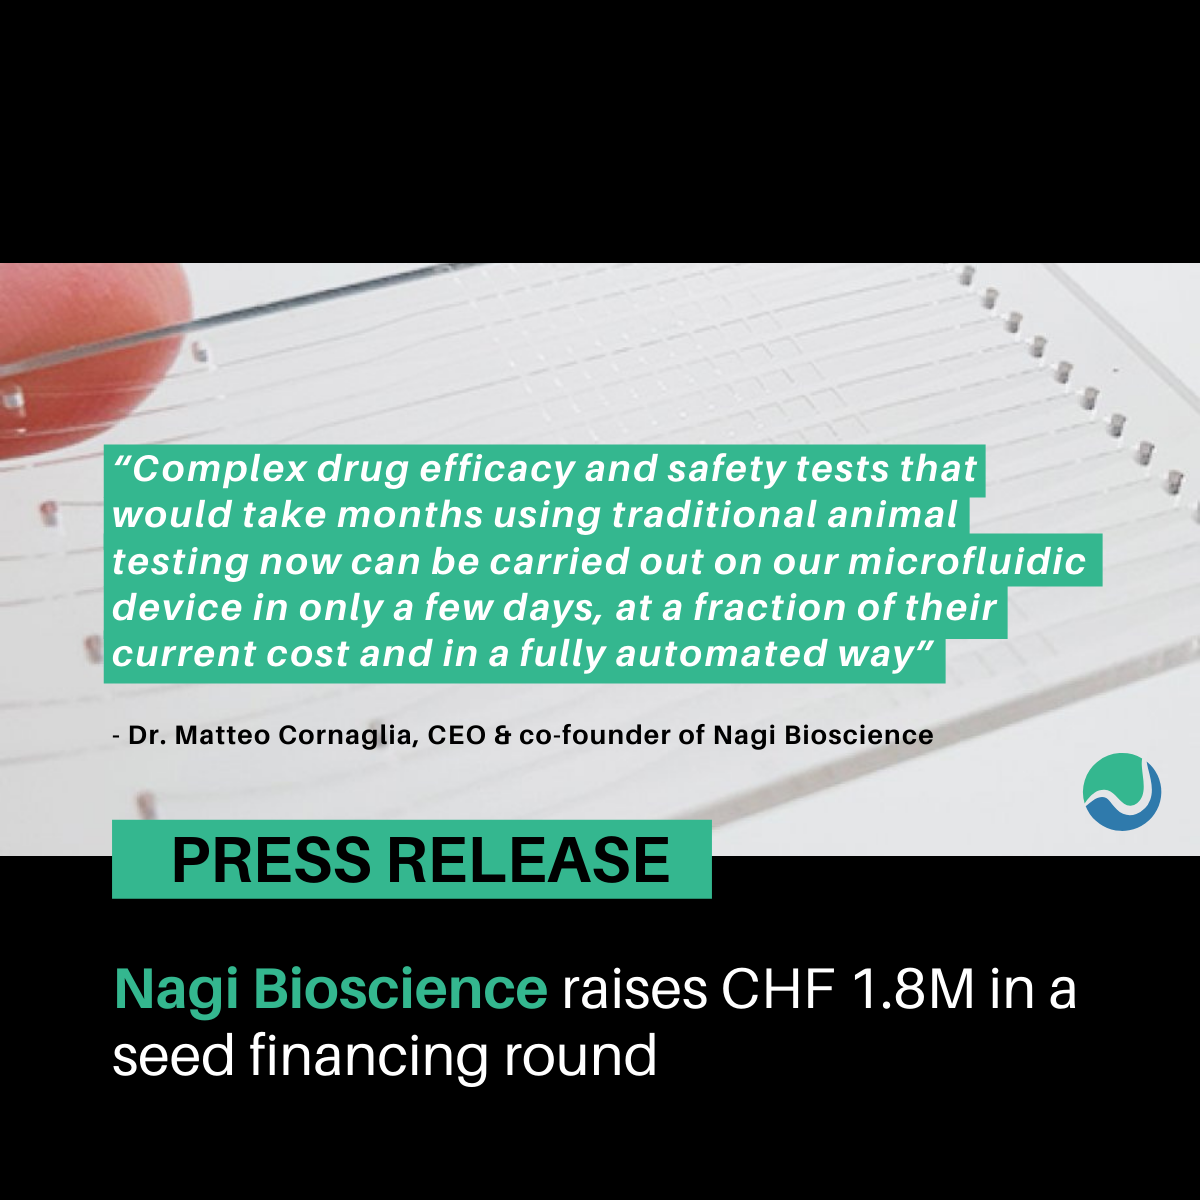 Nagi Bioscience is proud to announce the closing of a CHF 1.8M seed financing round